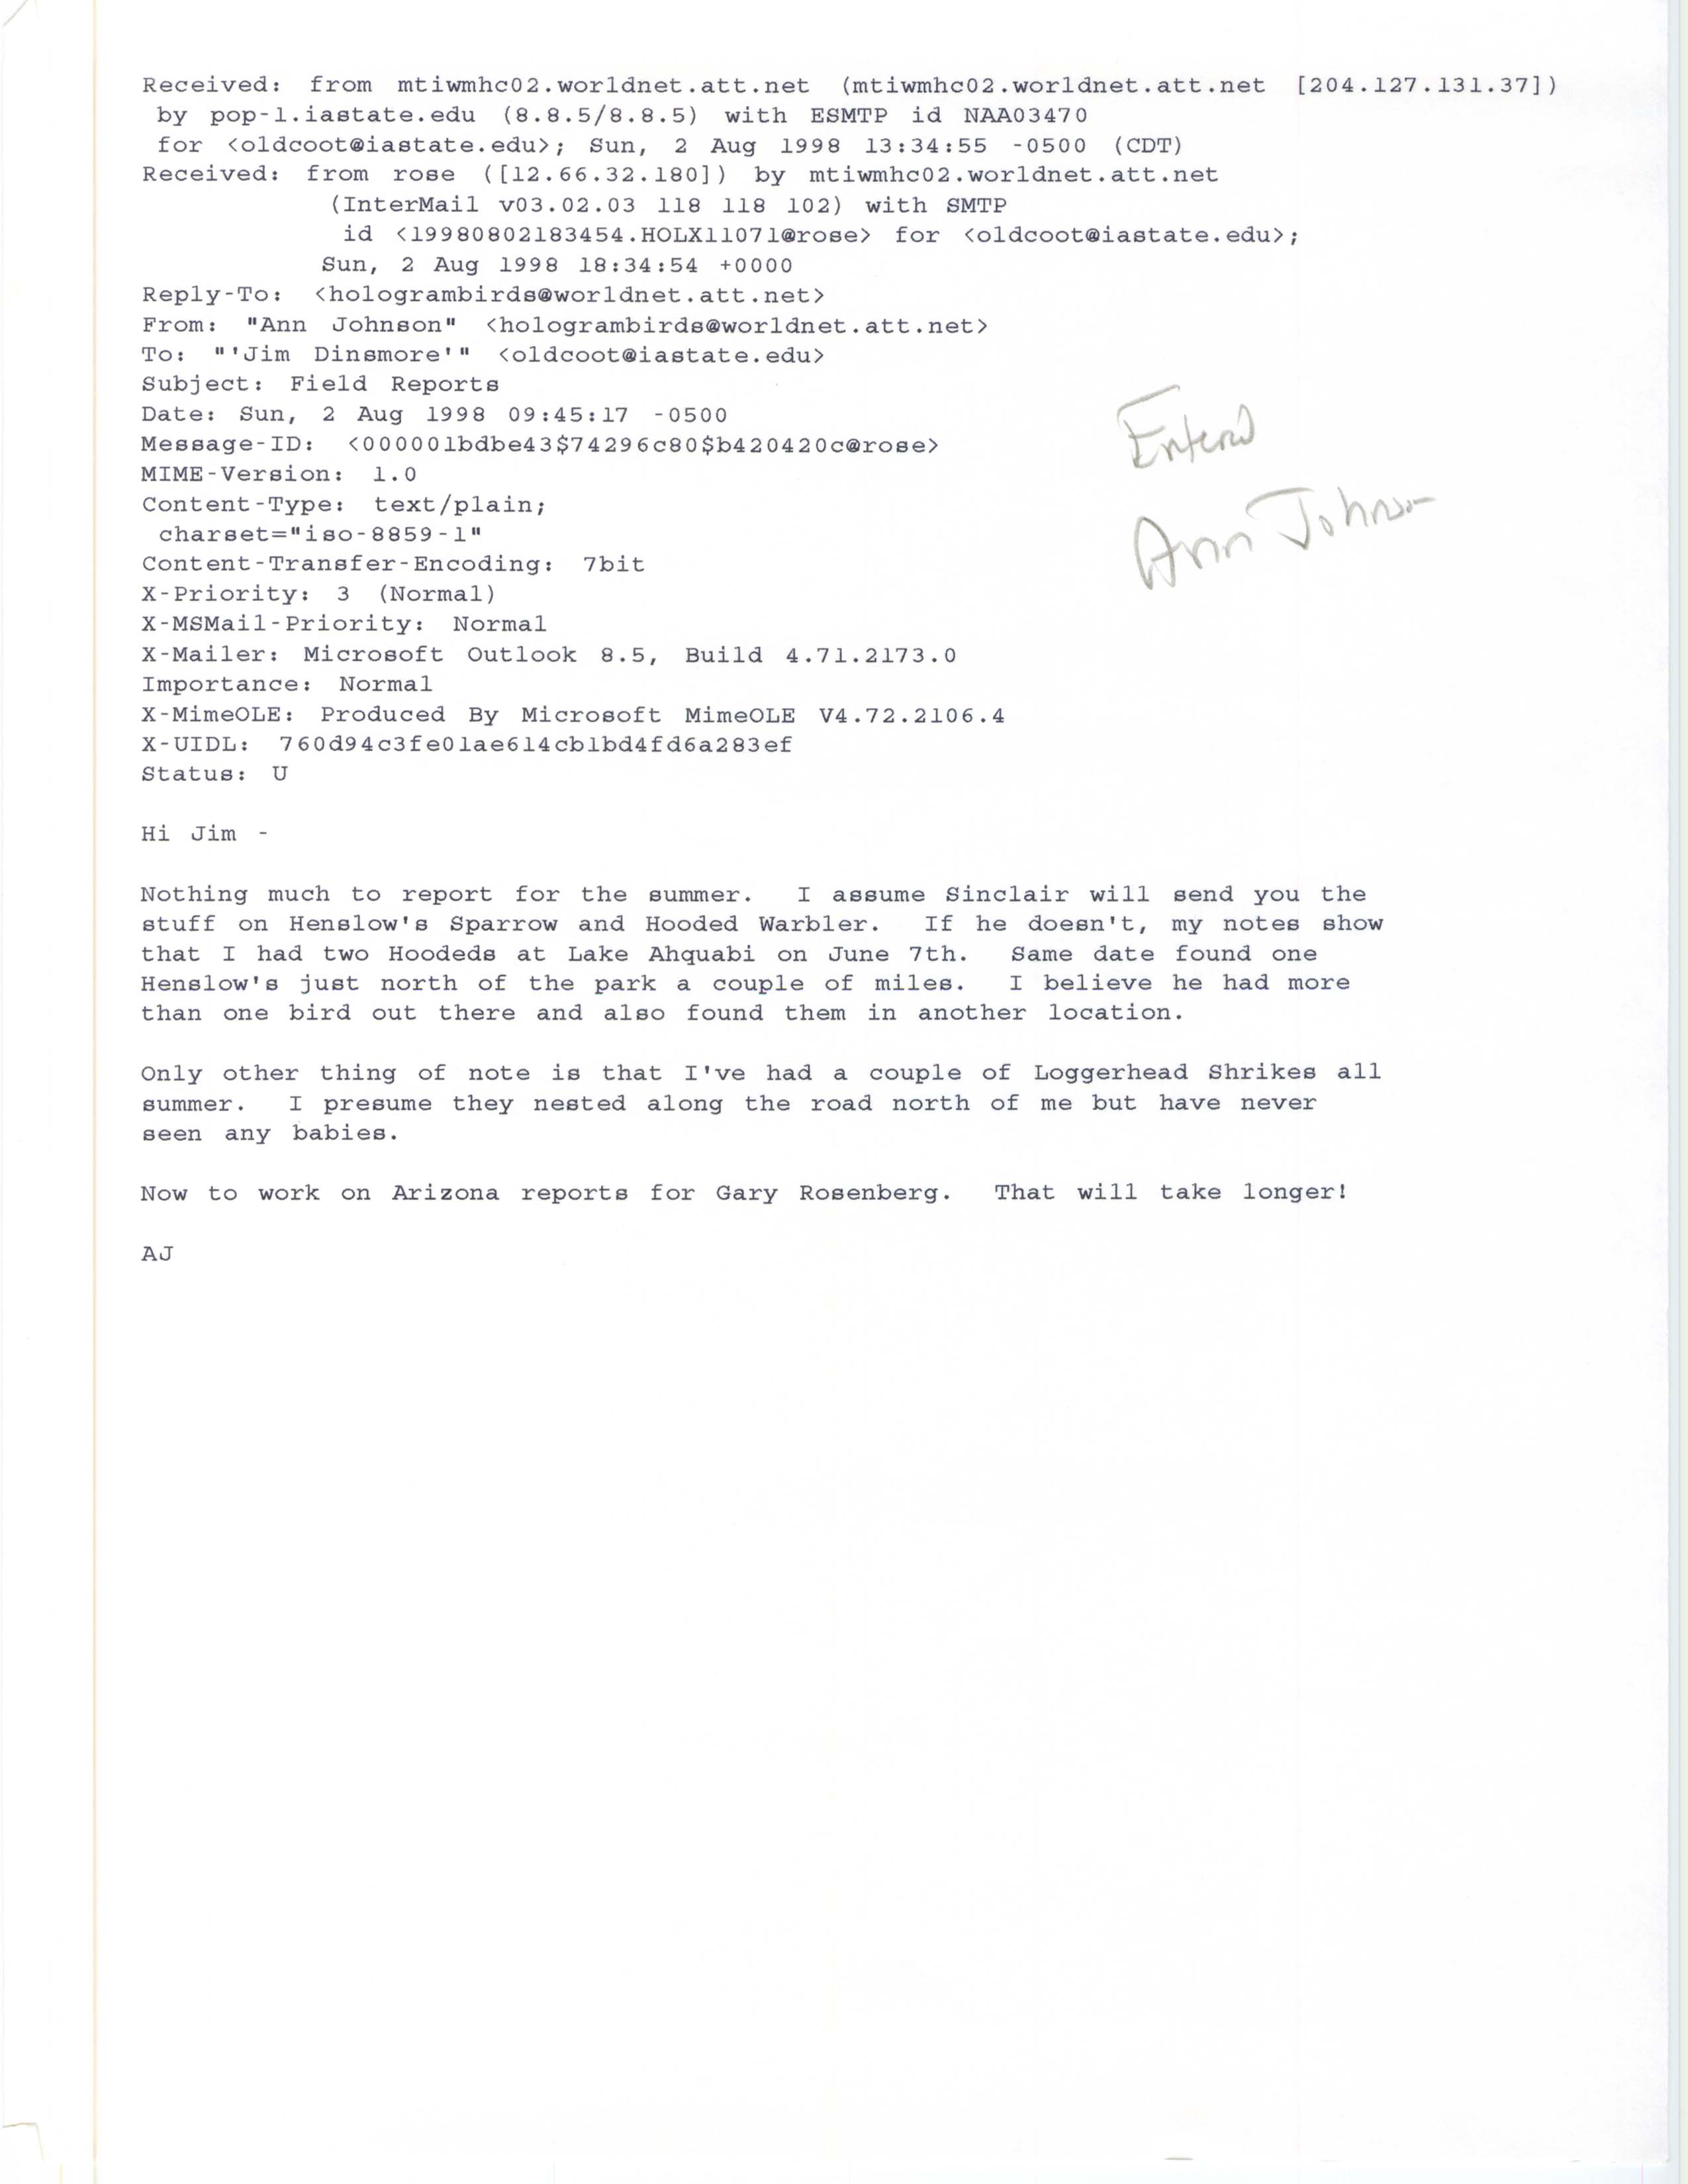 Ann Johnson email to Jim Dinsmore regarding field reports, August 2, 1998